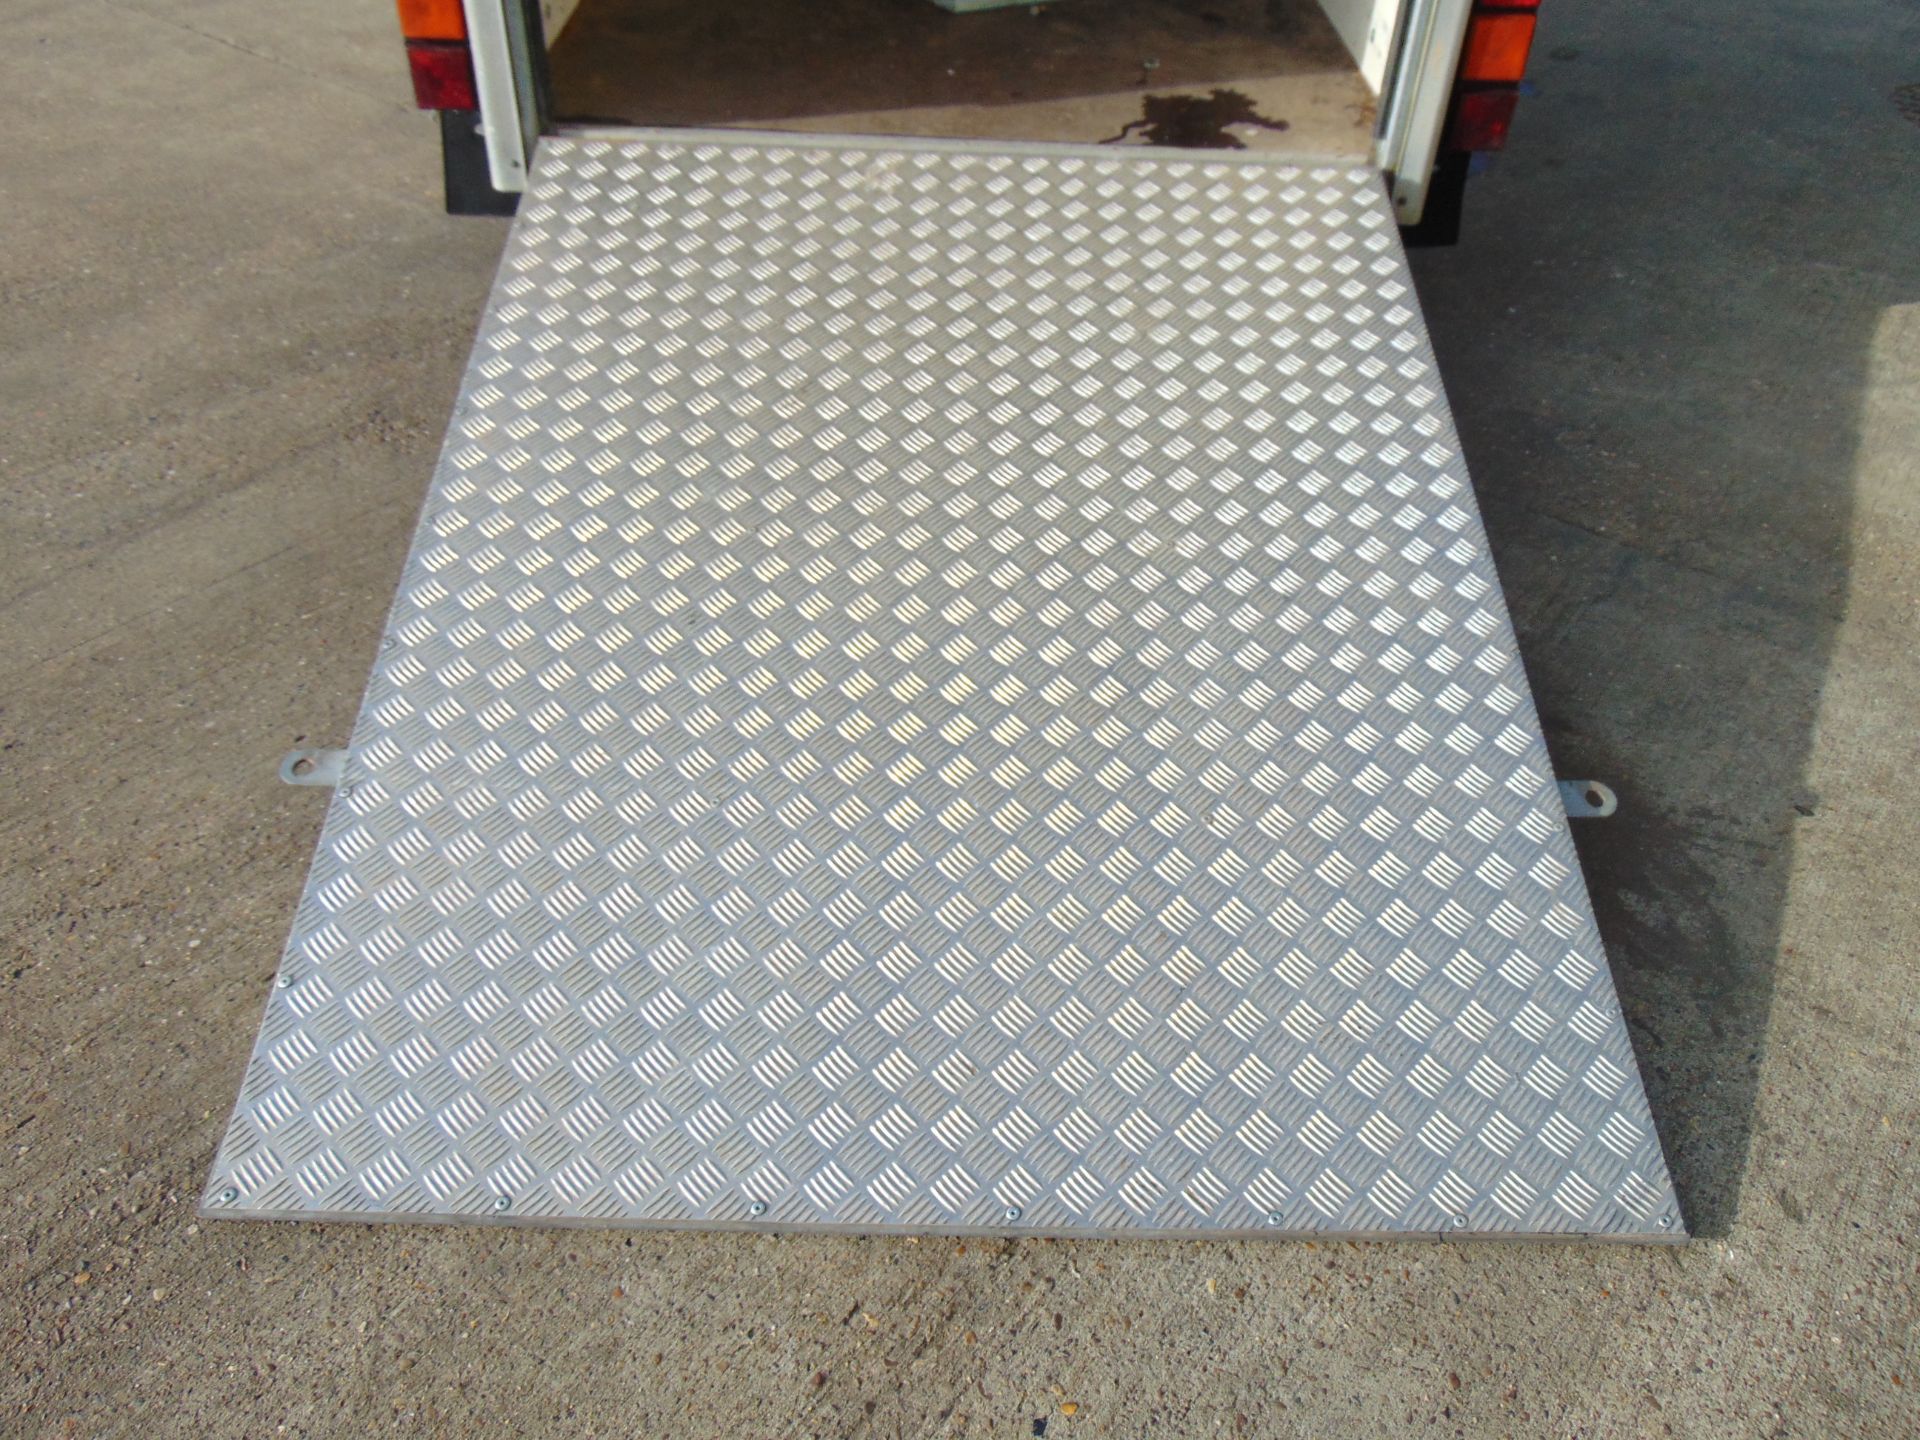 Twin Axle Indispension Box Trailer c/w Dropdown Tailgate / Loading Ramp - Image 11 of 19